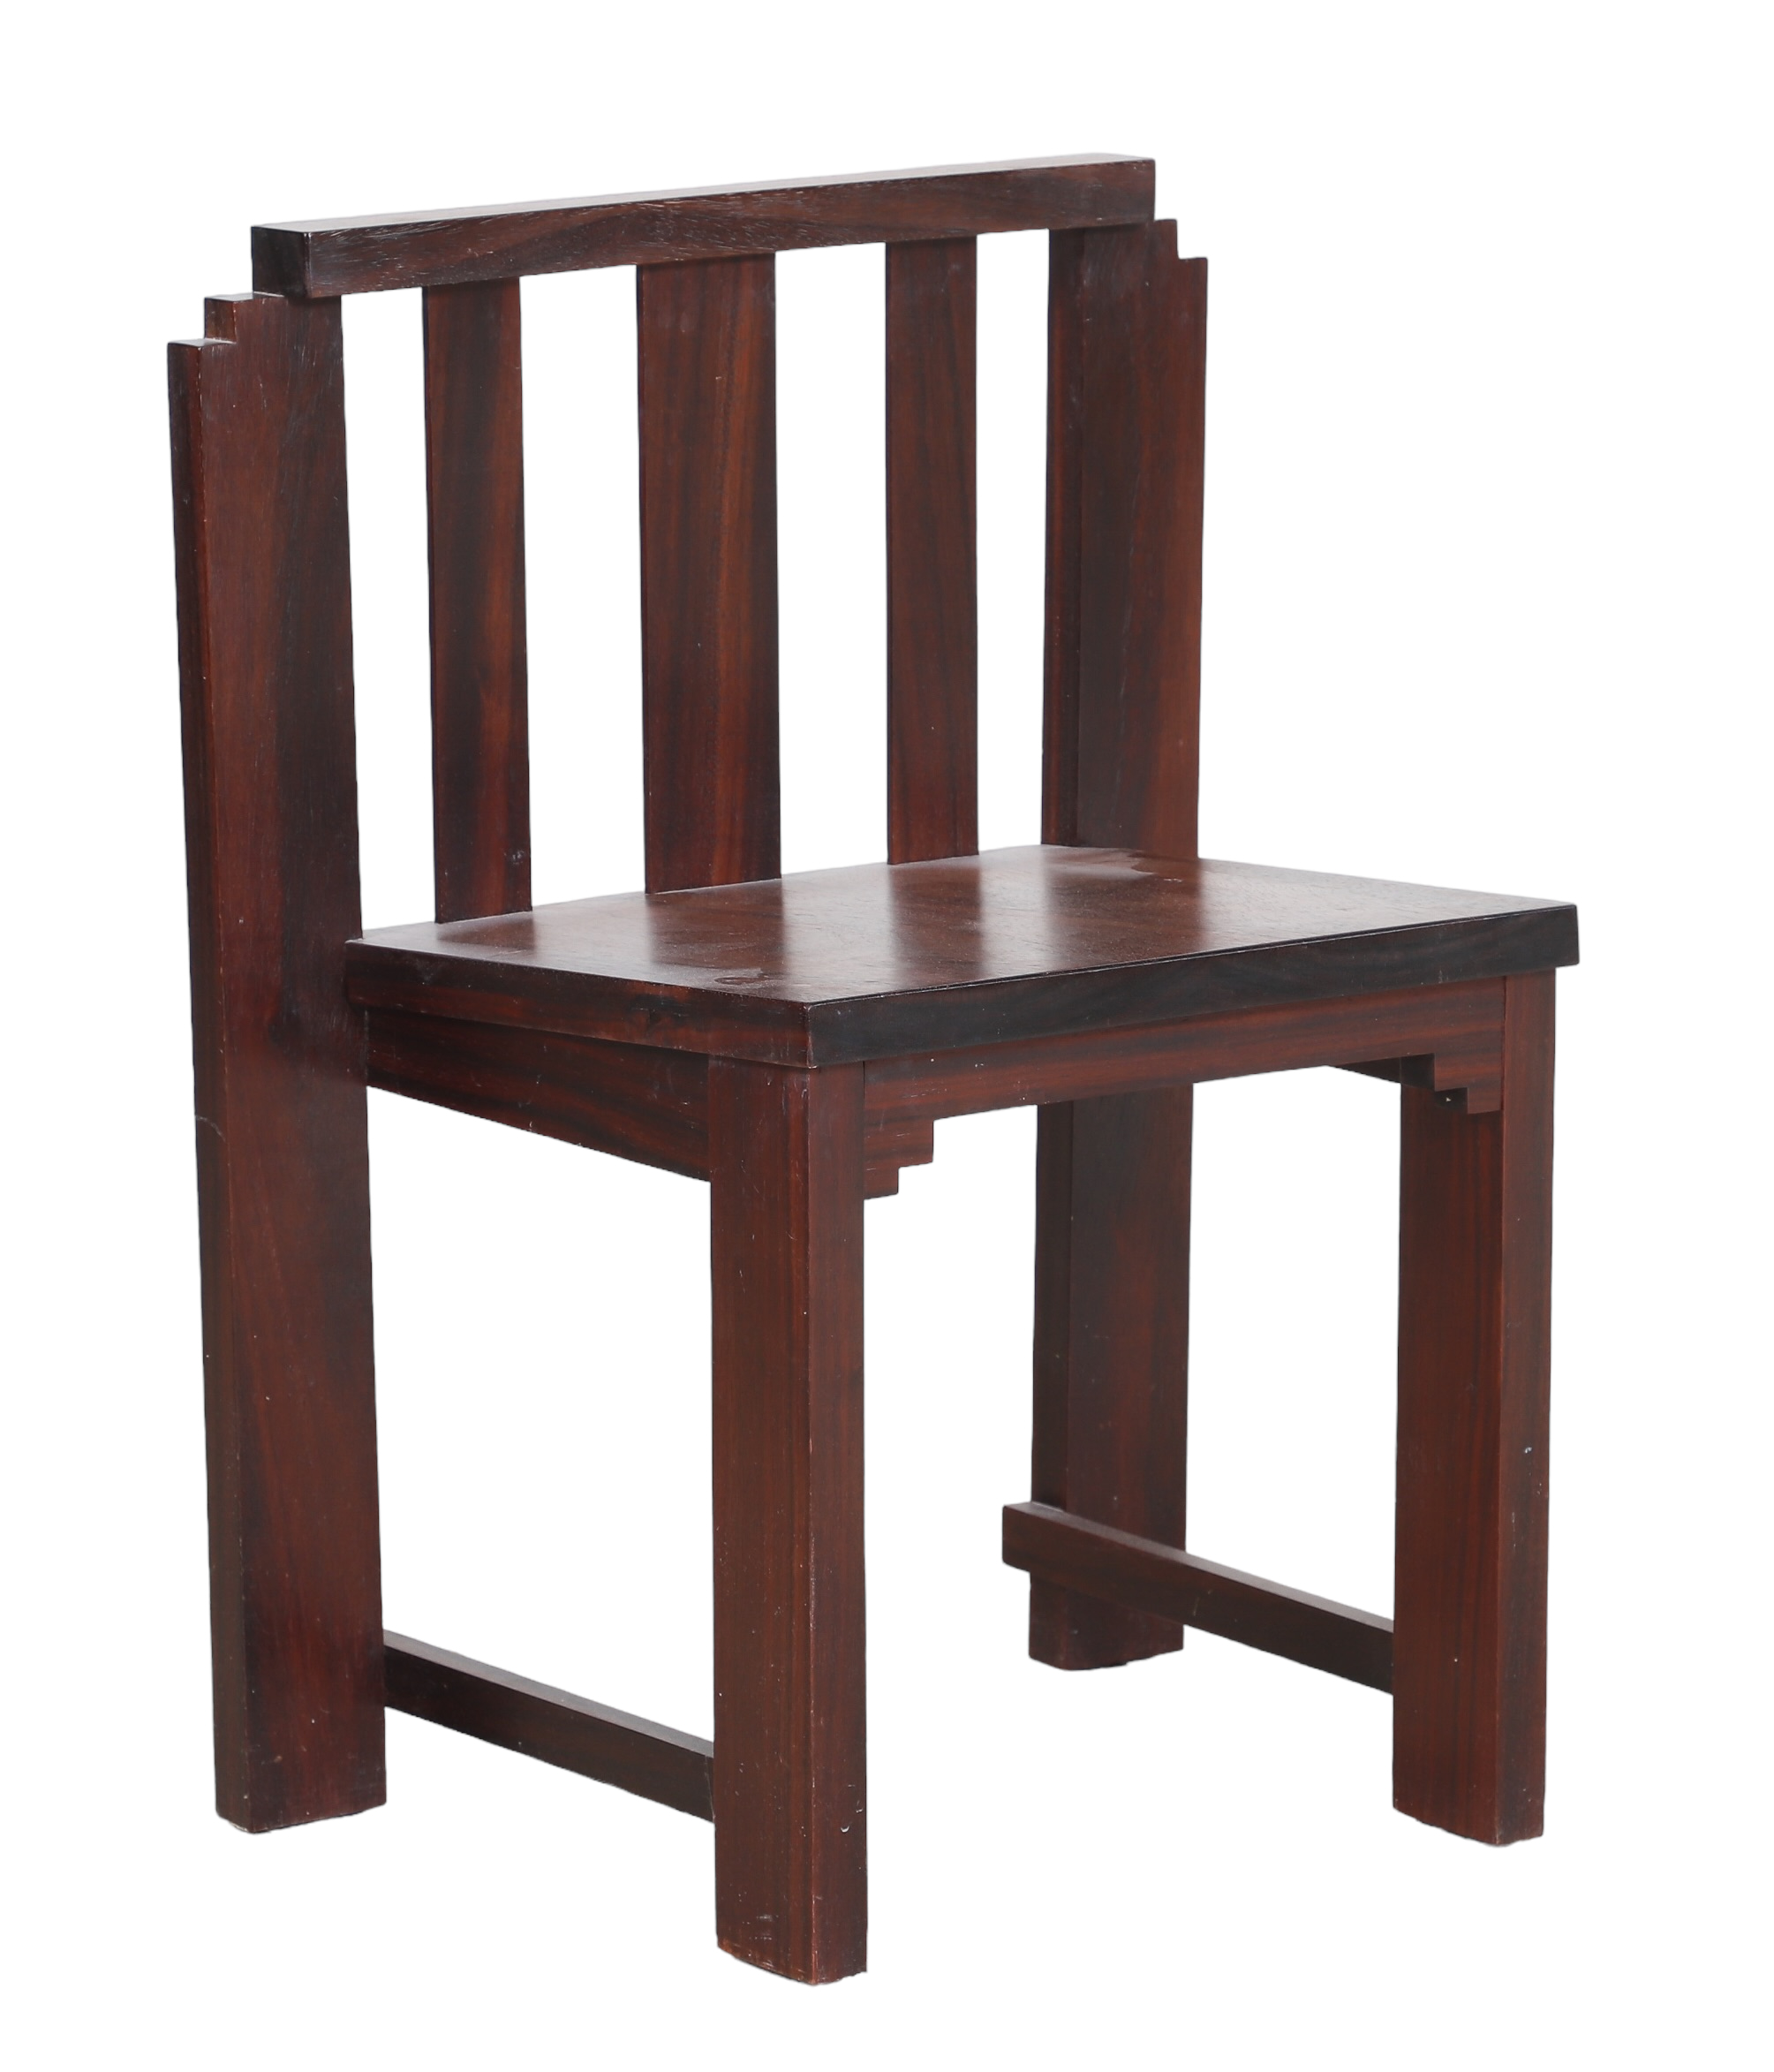 Chinese elmwood low chair, slatted